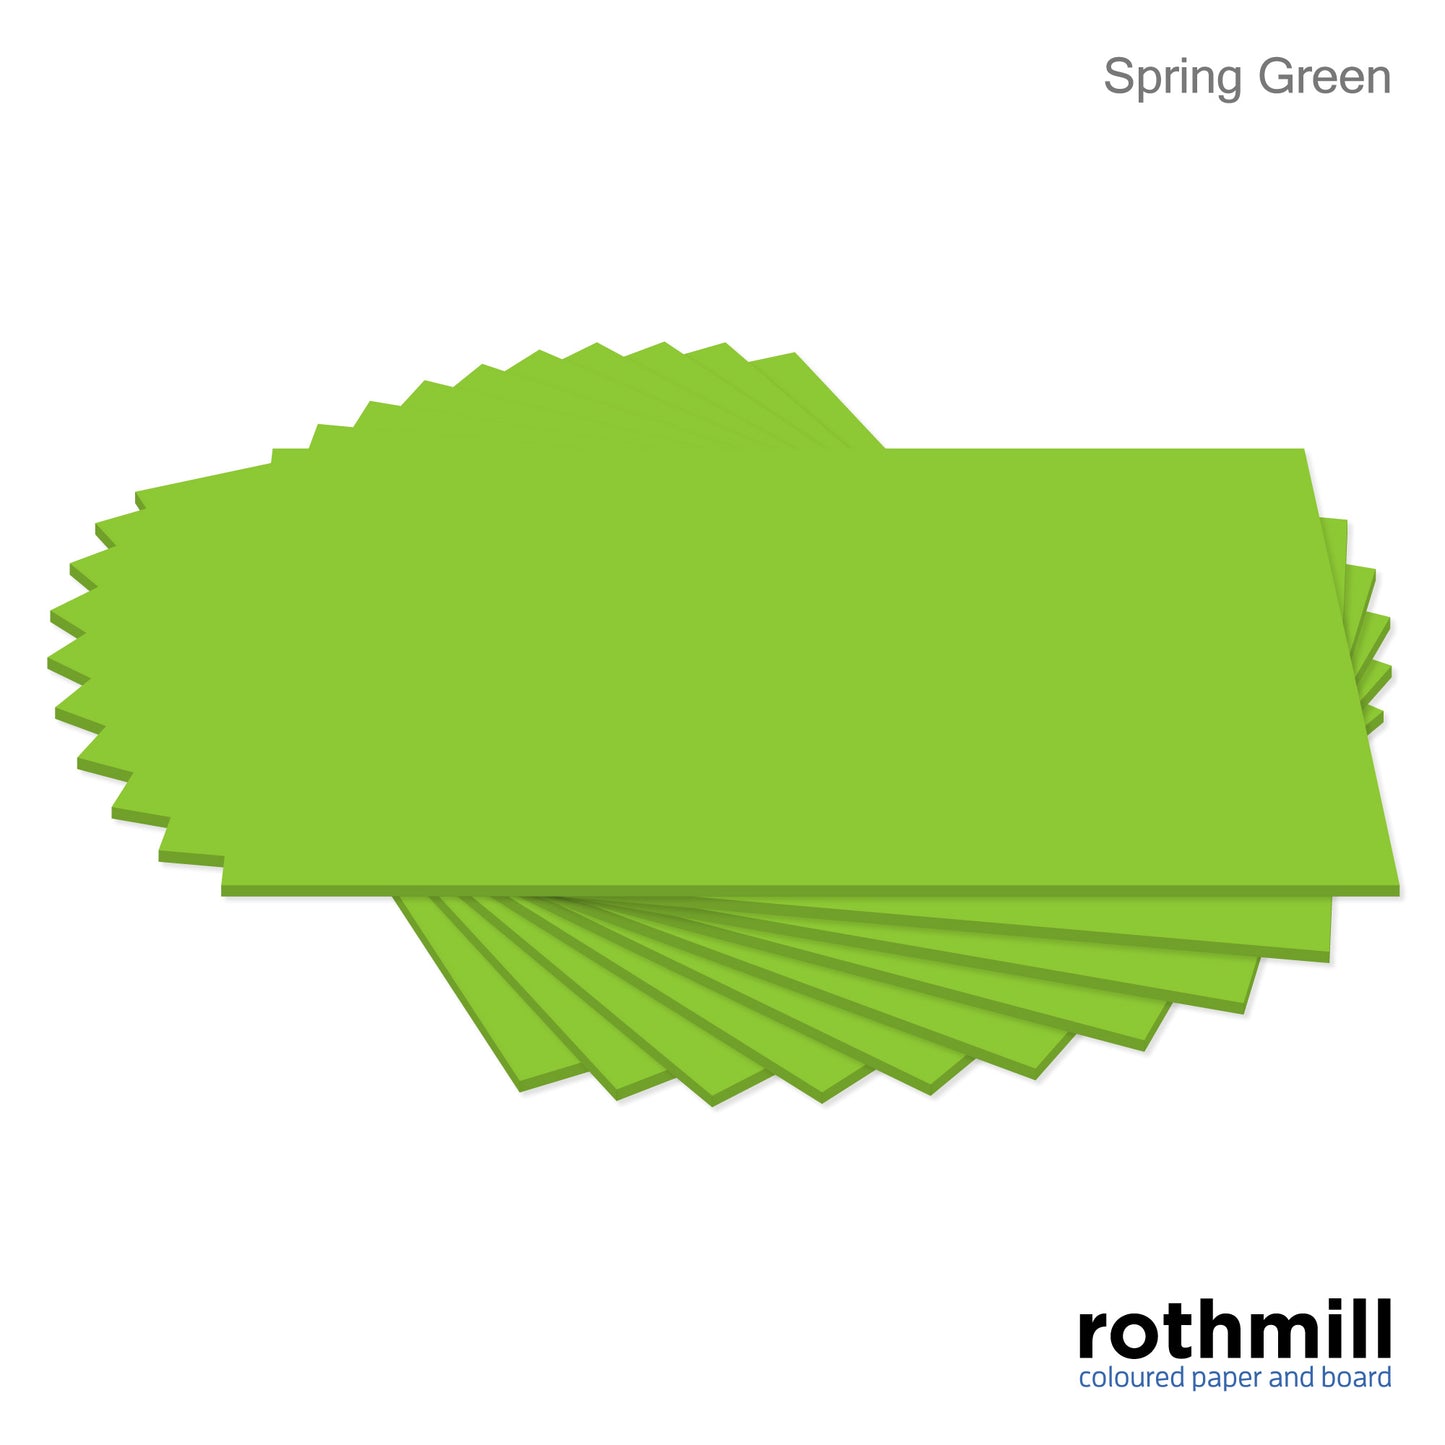 Rothmill Board | 280 microns | 220 gsm | SRA2 (450x640mm) | 100 sheets | Single Colour Packs